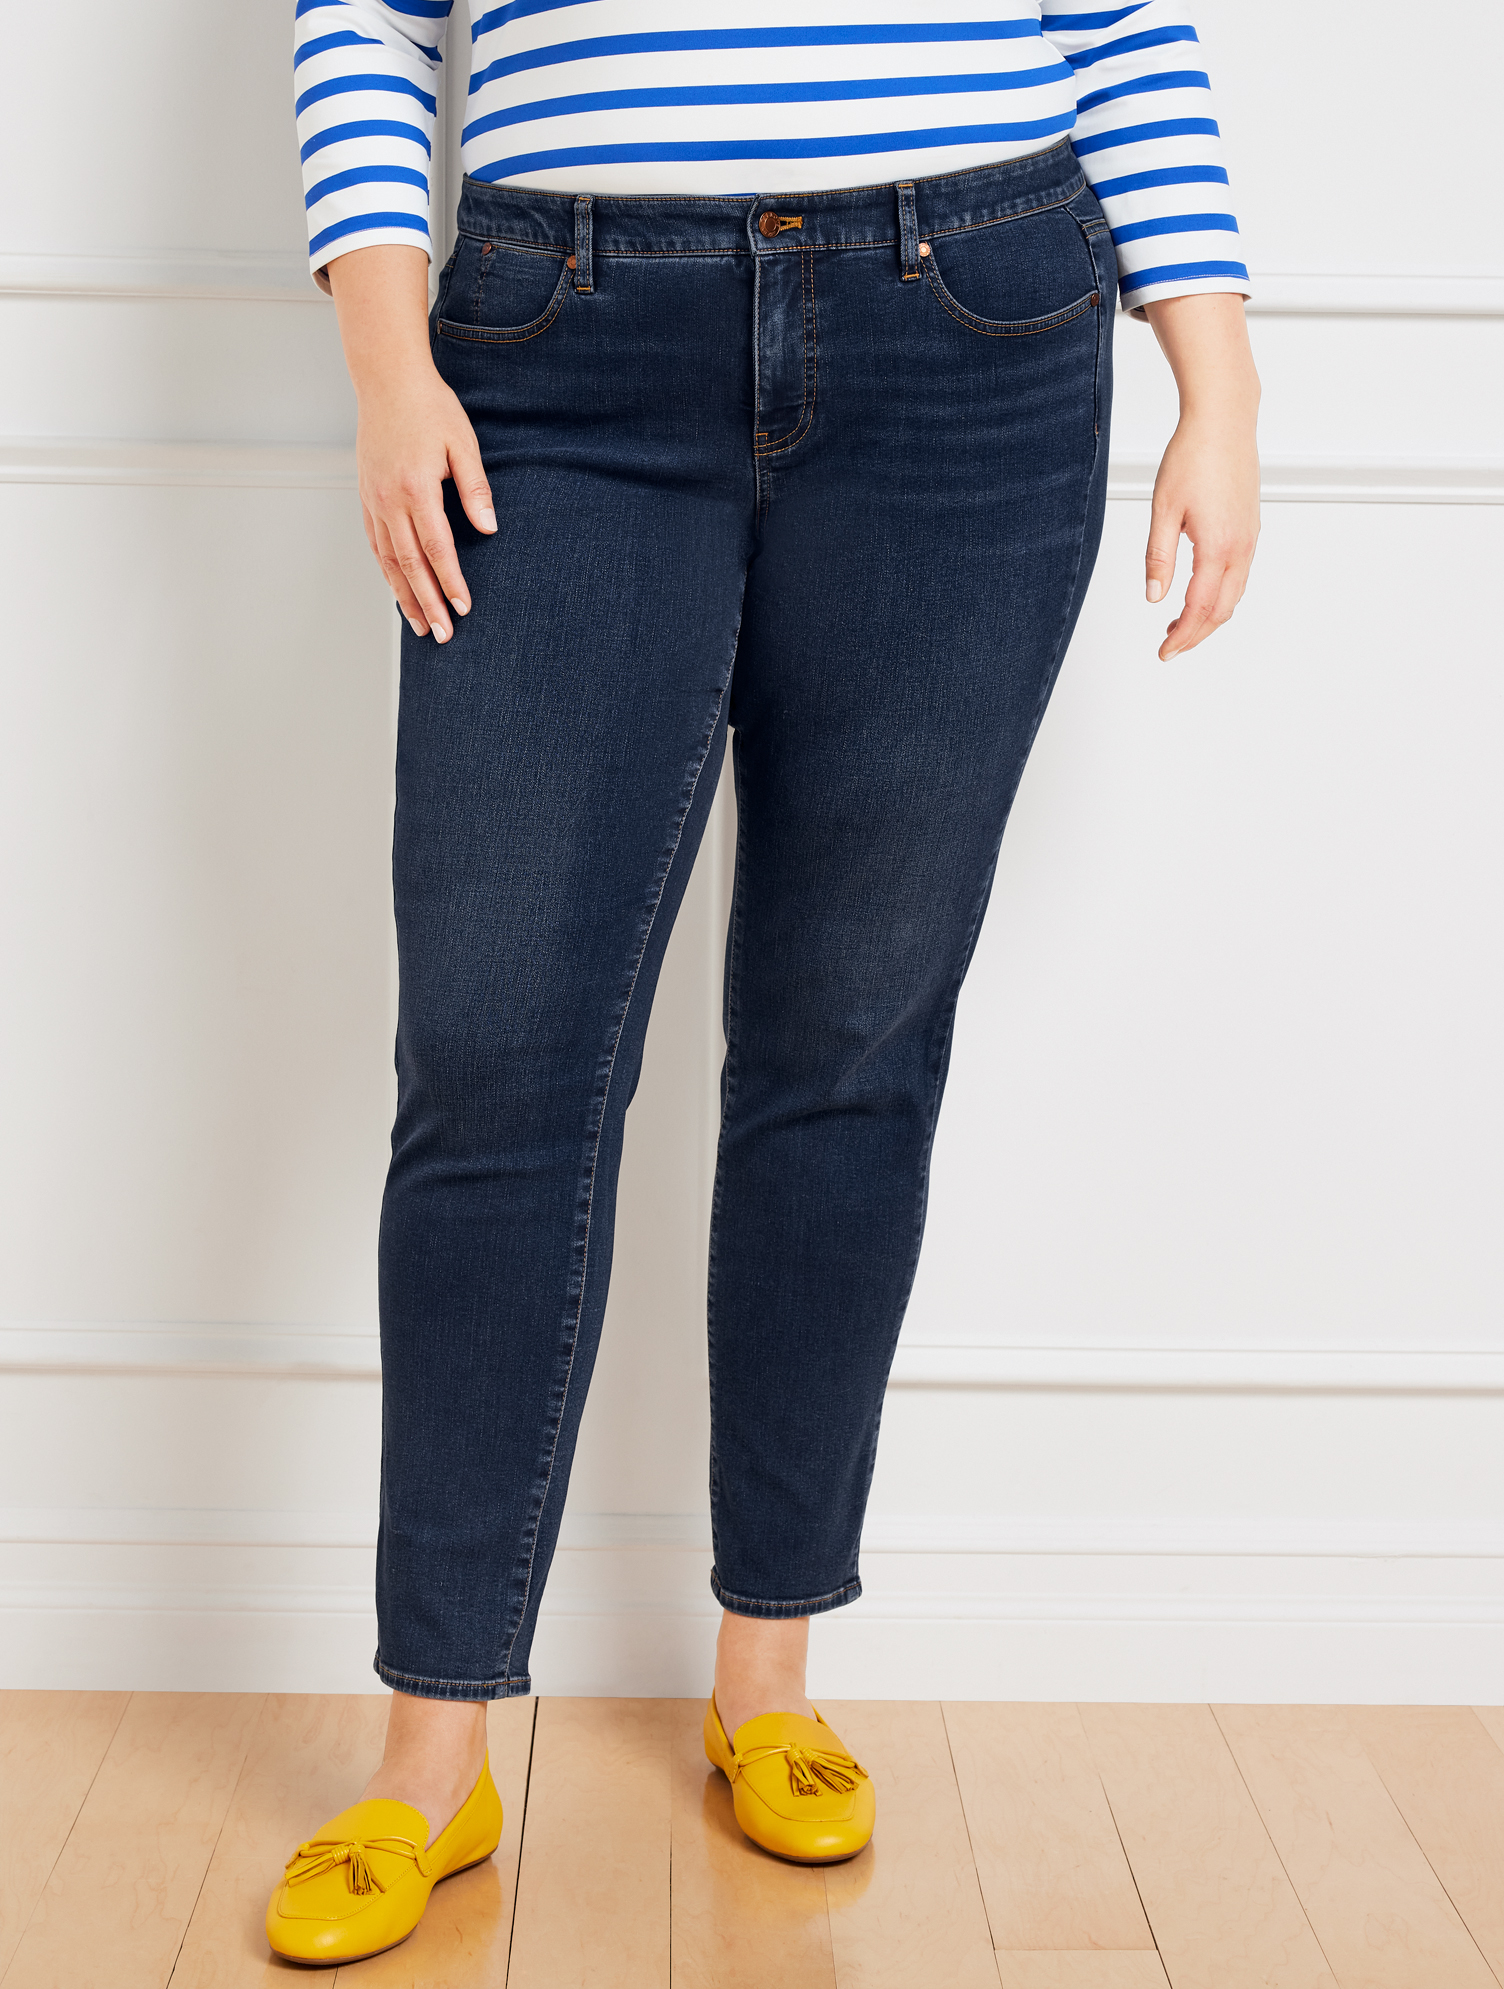 Talbots Plus Exclusive Slim Ankle Jeans - Providence Wash - 22